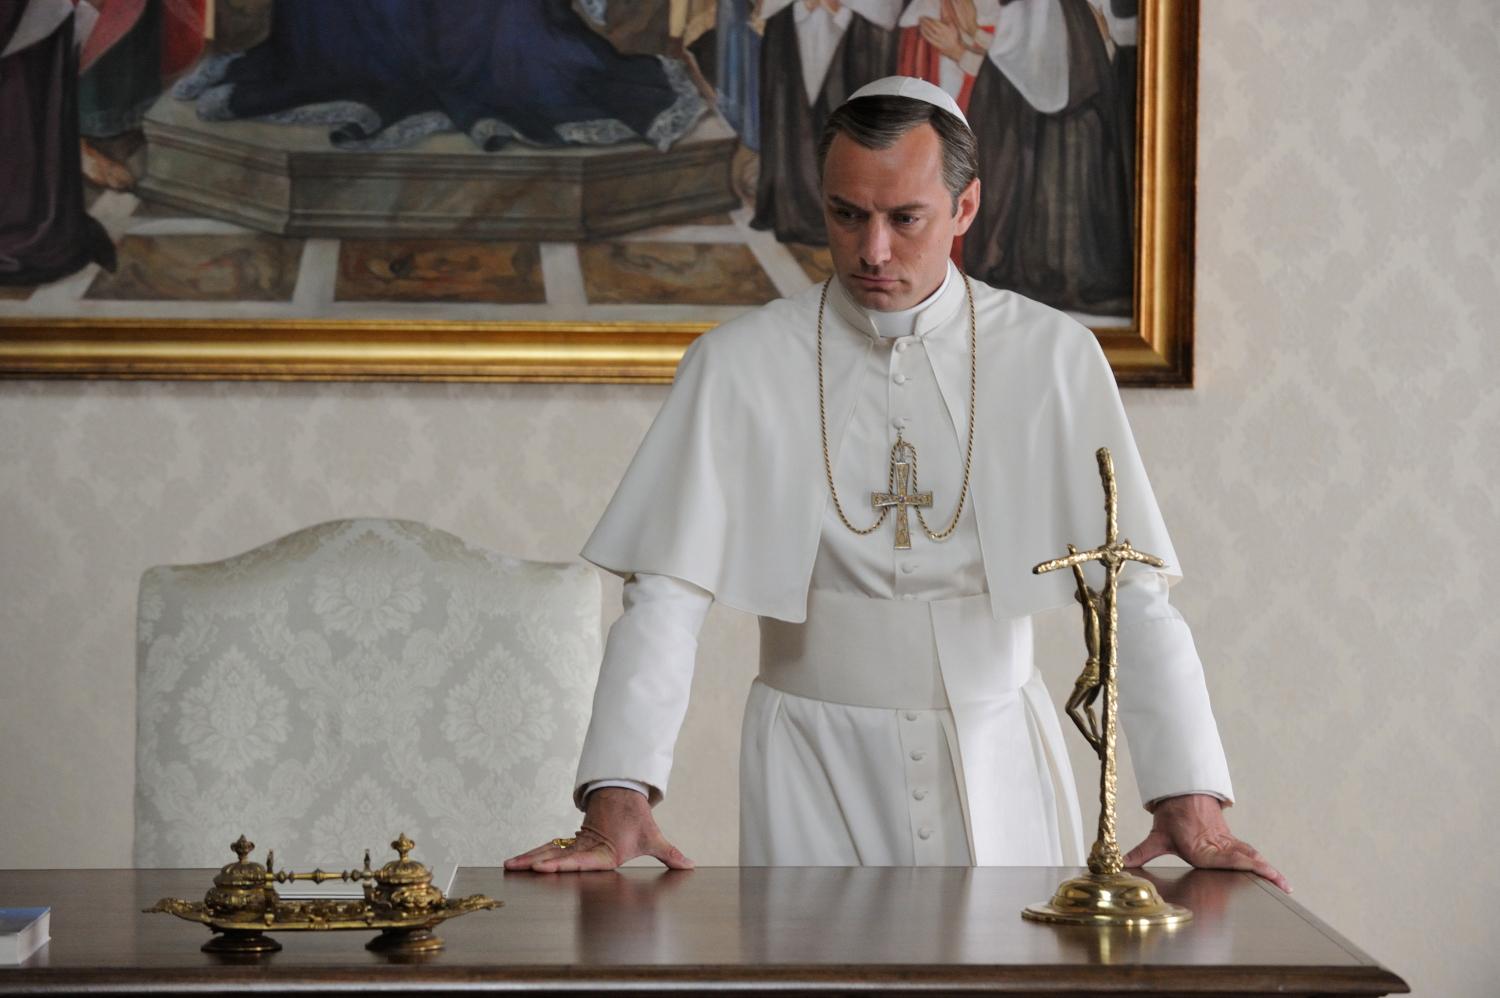 'Young Pope' has no prayer of being credible - San Francisco Chronicle